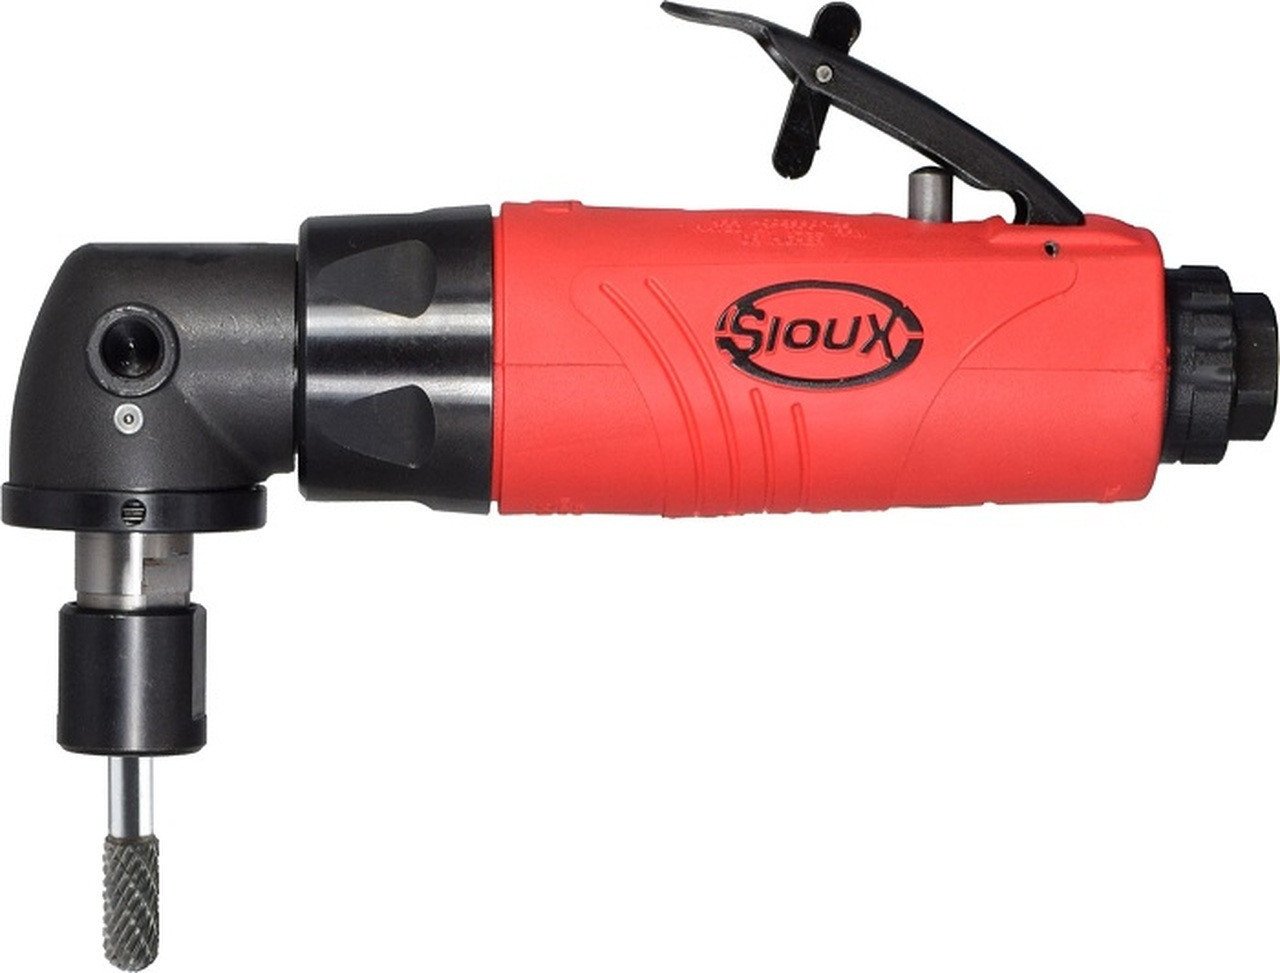 Sioux Tools SAG05S15M6 Right Angle Die Grinder | 0.5 HP | 15000 RPM | 200 Series Collet | Rear Exhaust